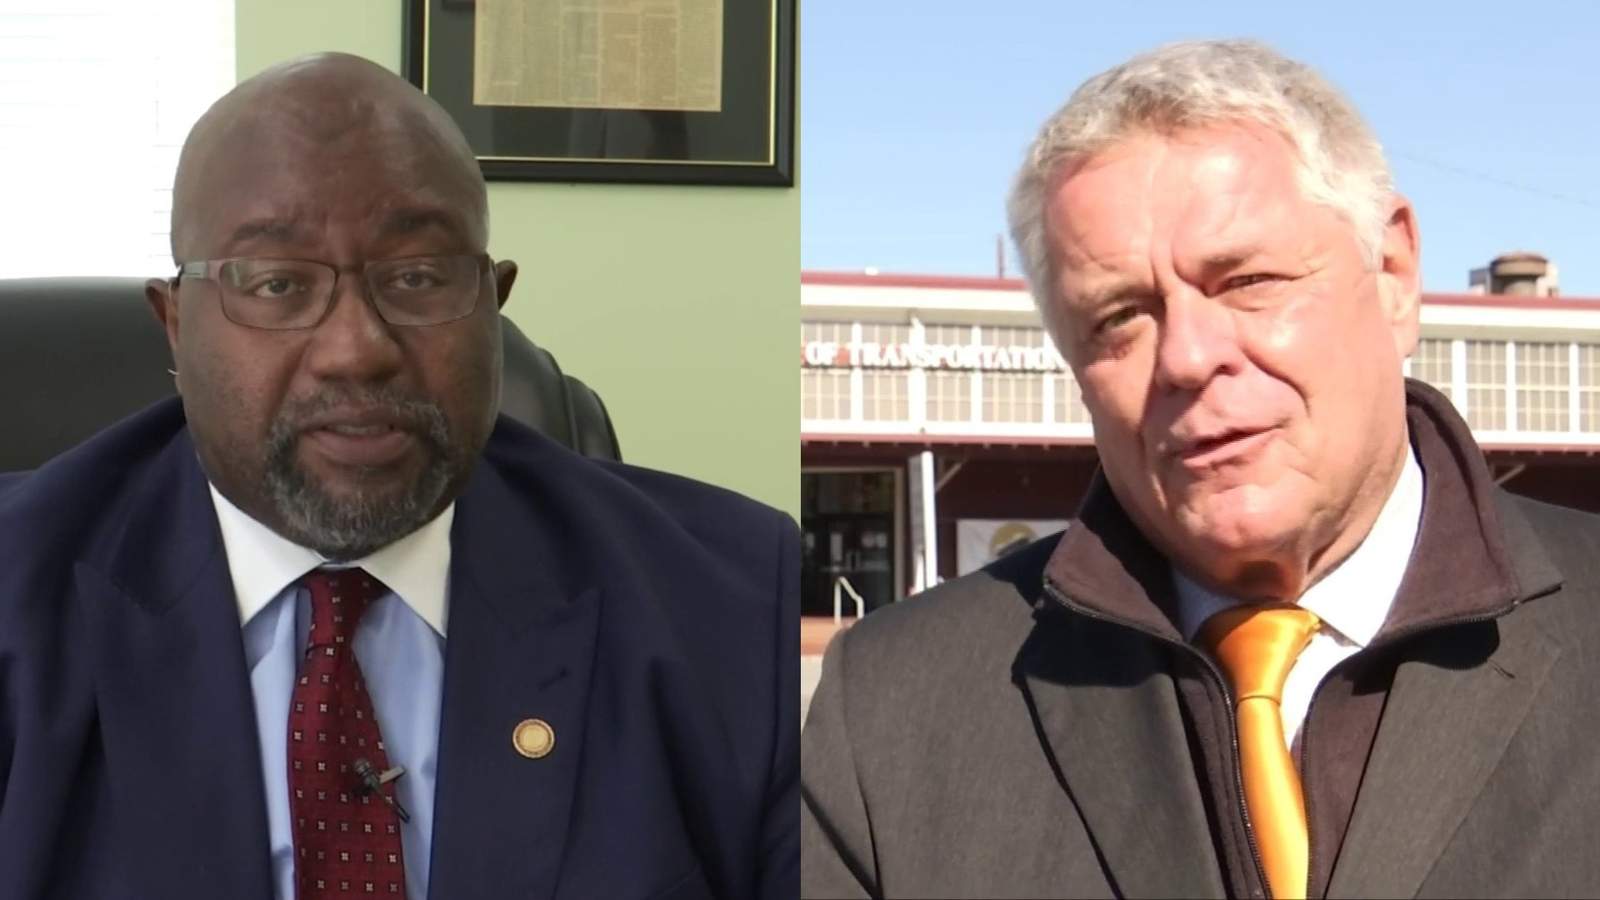 Roanoke City mayoral candidates differ on one controversial issue: the downtown bus station